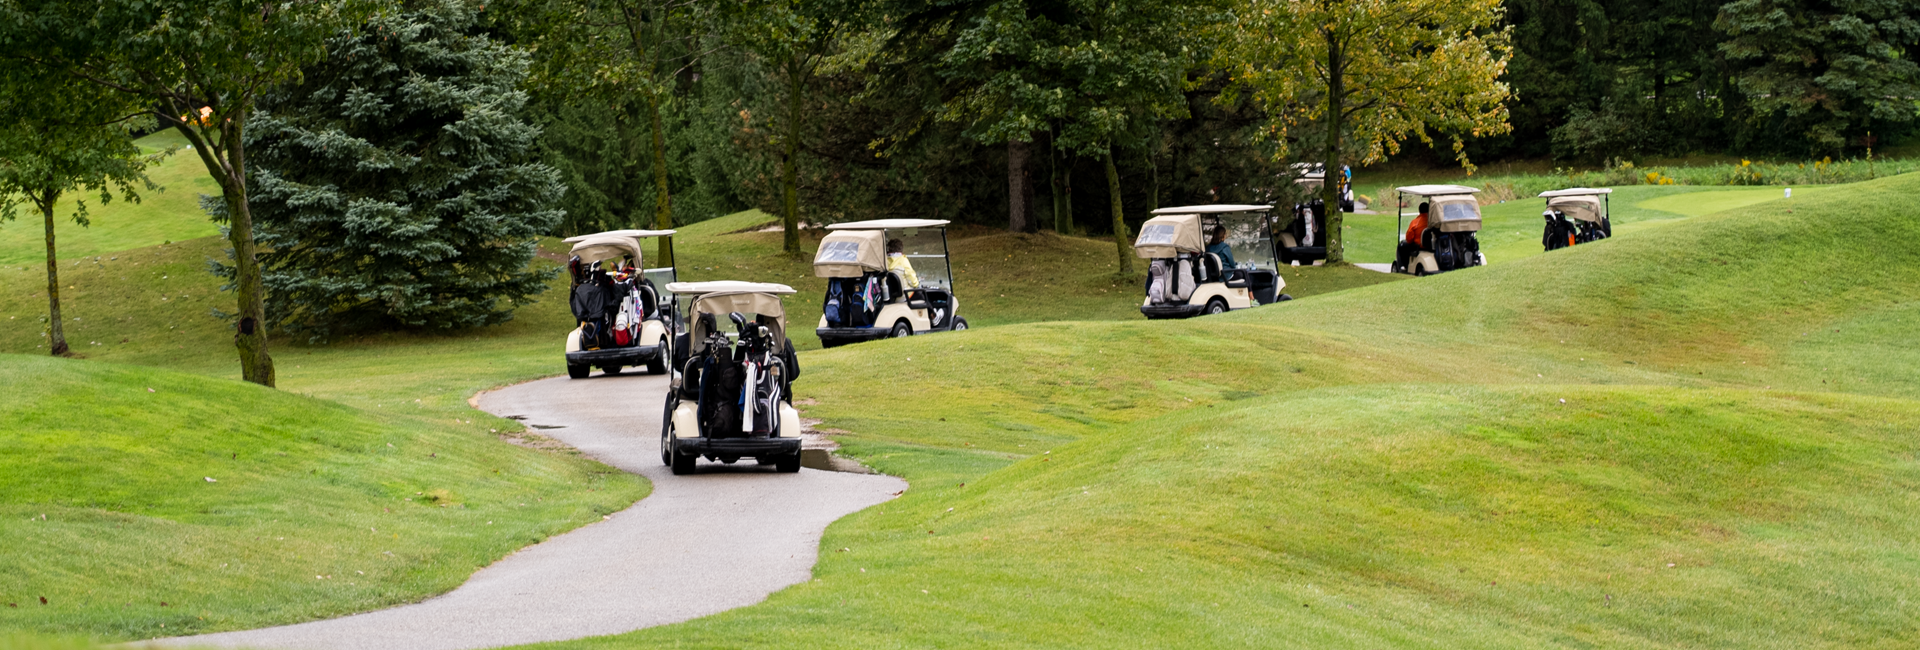 Golfers in carts on their way to their first holes.